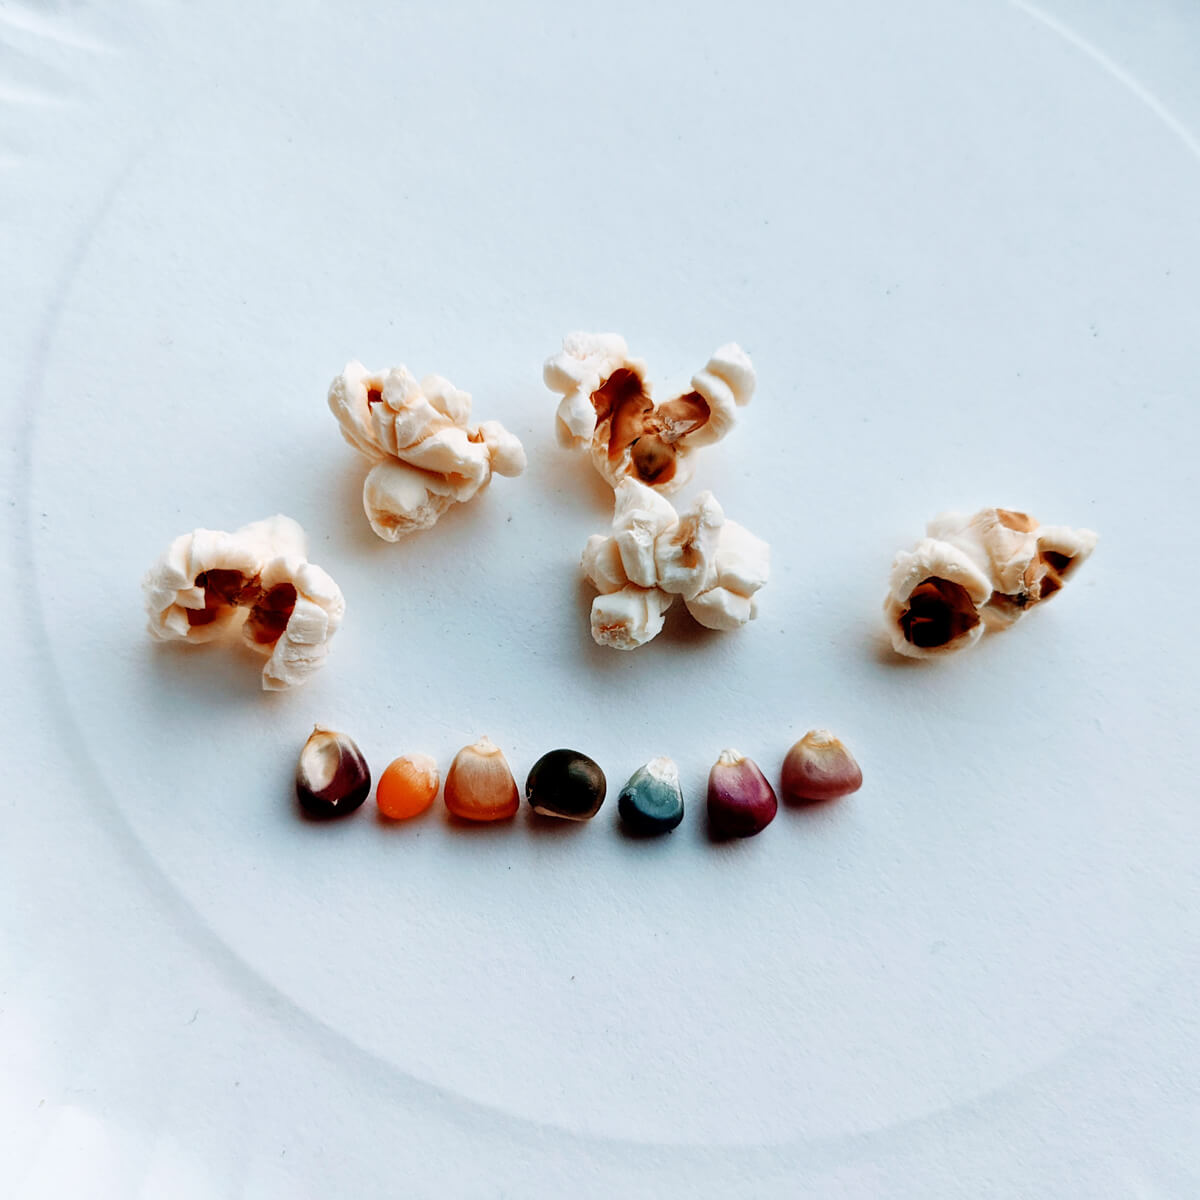 Glass Gem Corn Popcorn Popped - Colorful Kernels and popped corn